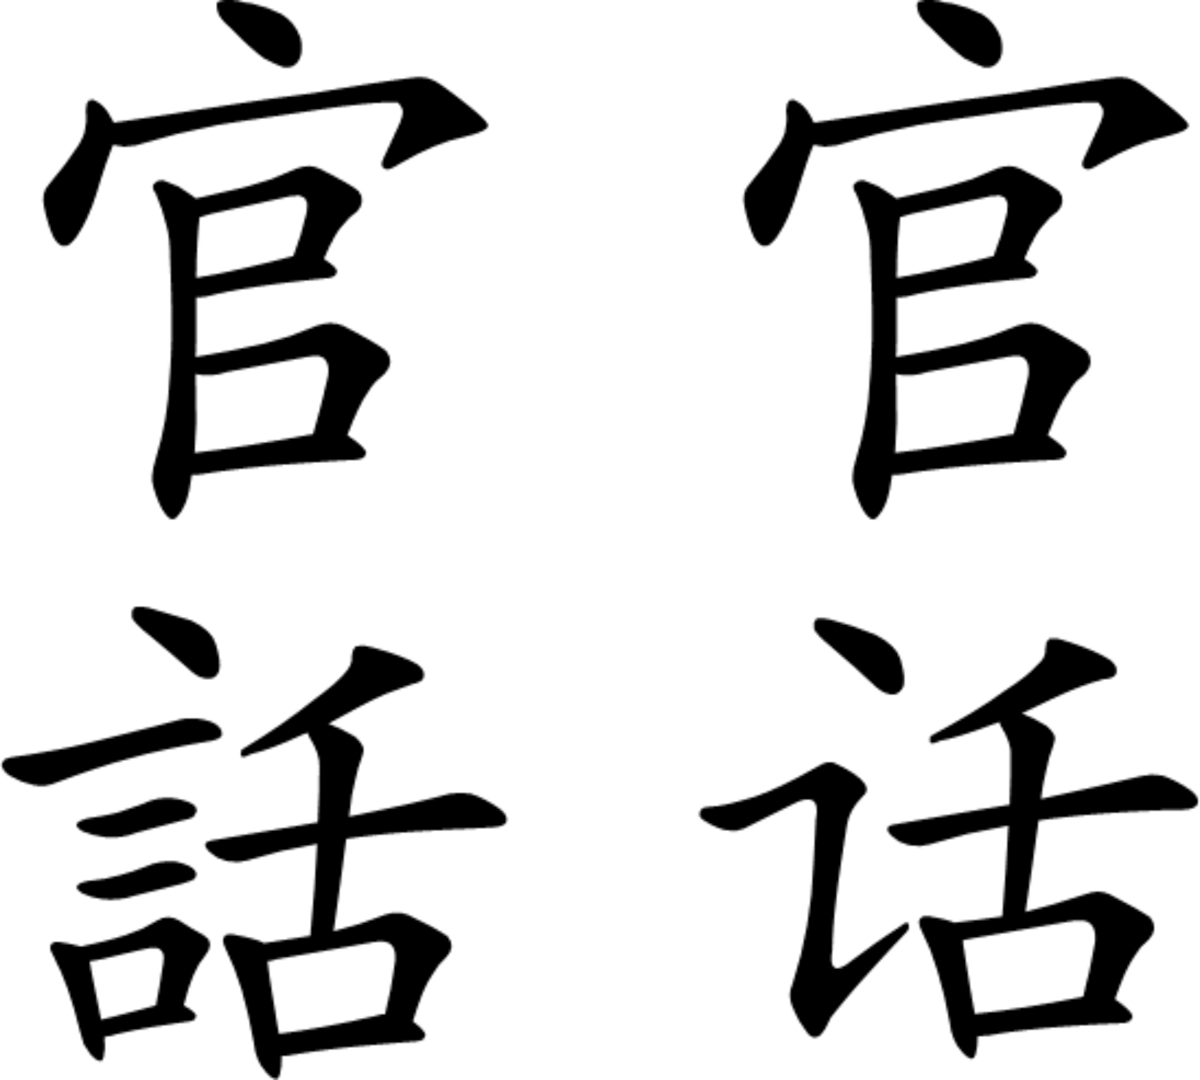 "Guanhua" or "Language of the Officials" written in both Traditional and Simplified Chinese